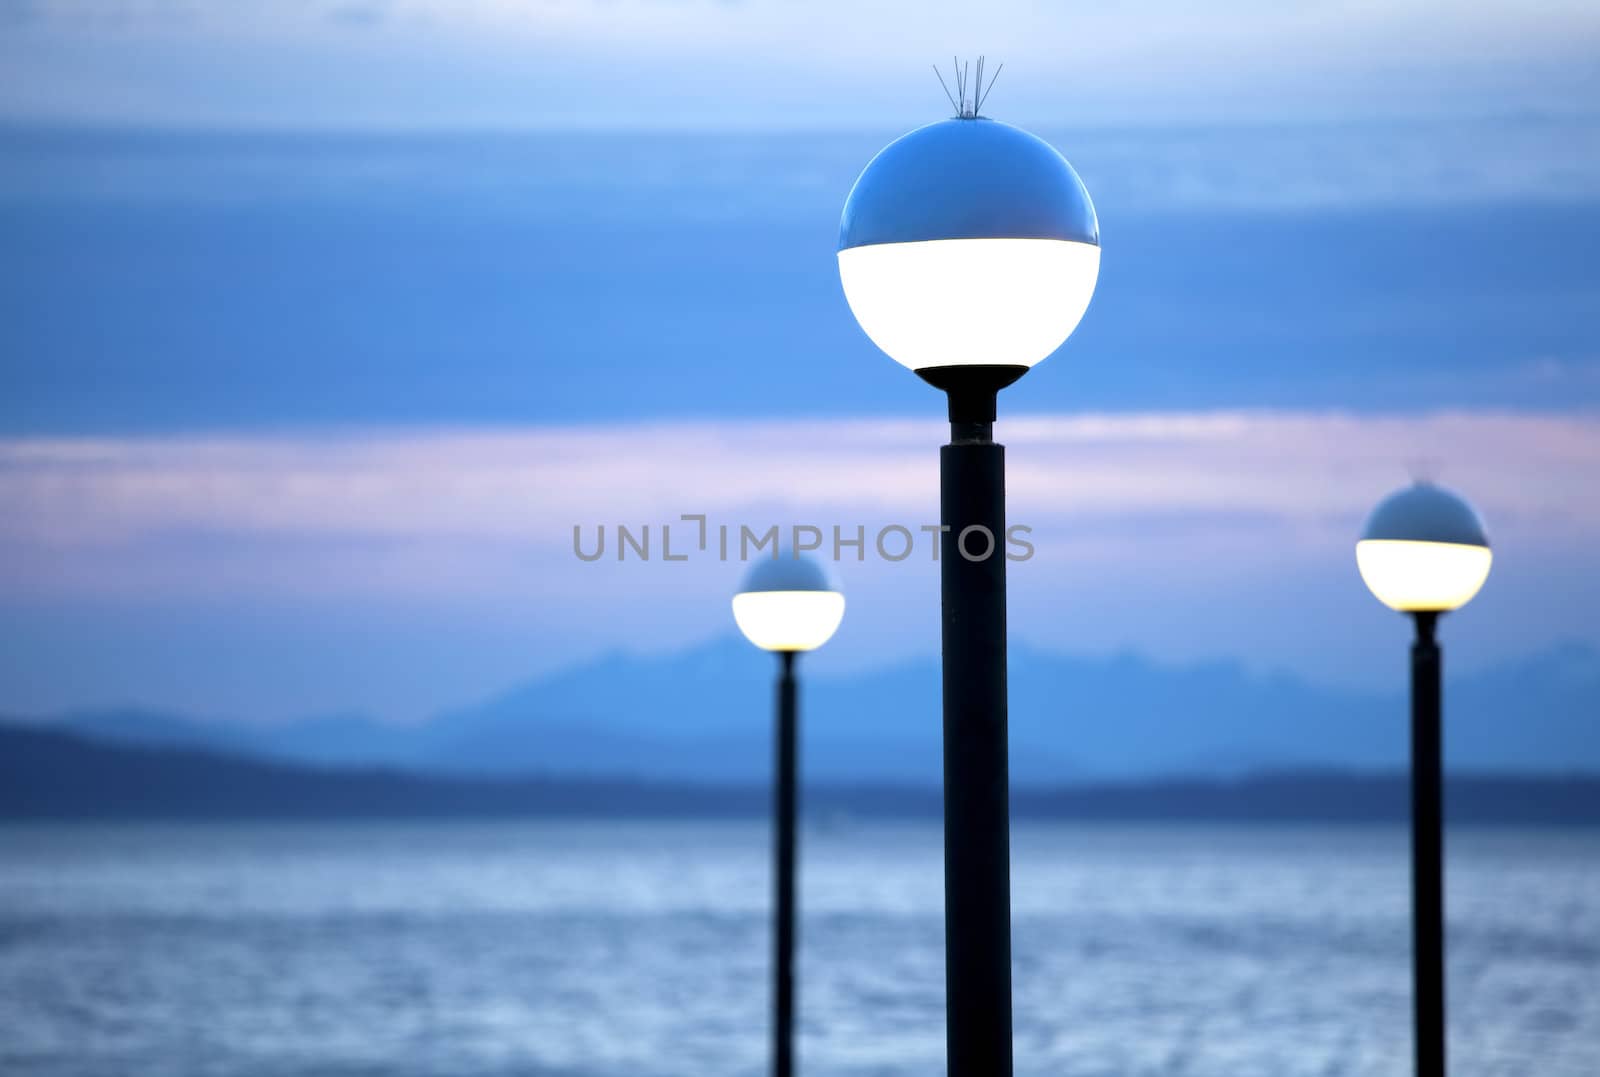 Lamp posts lit at night with blue mountain background and lake scene at dusk